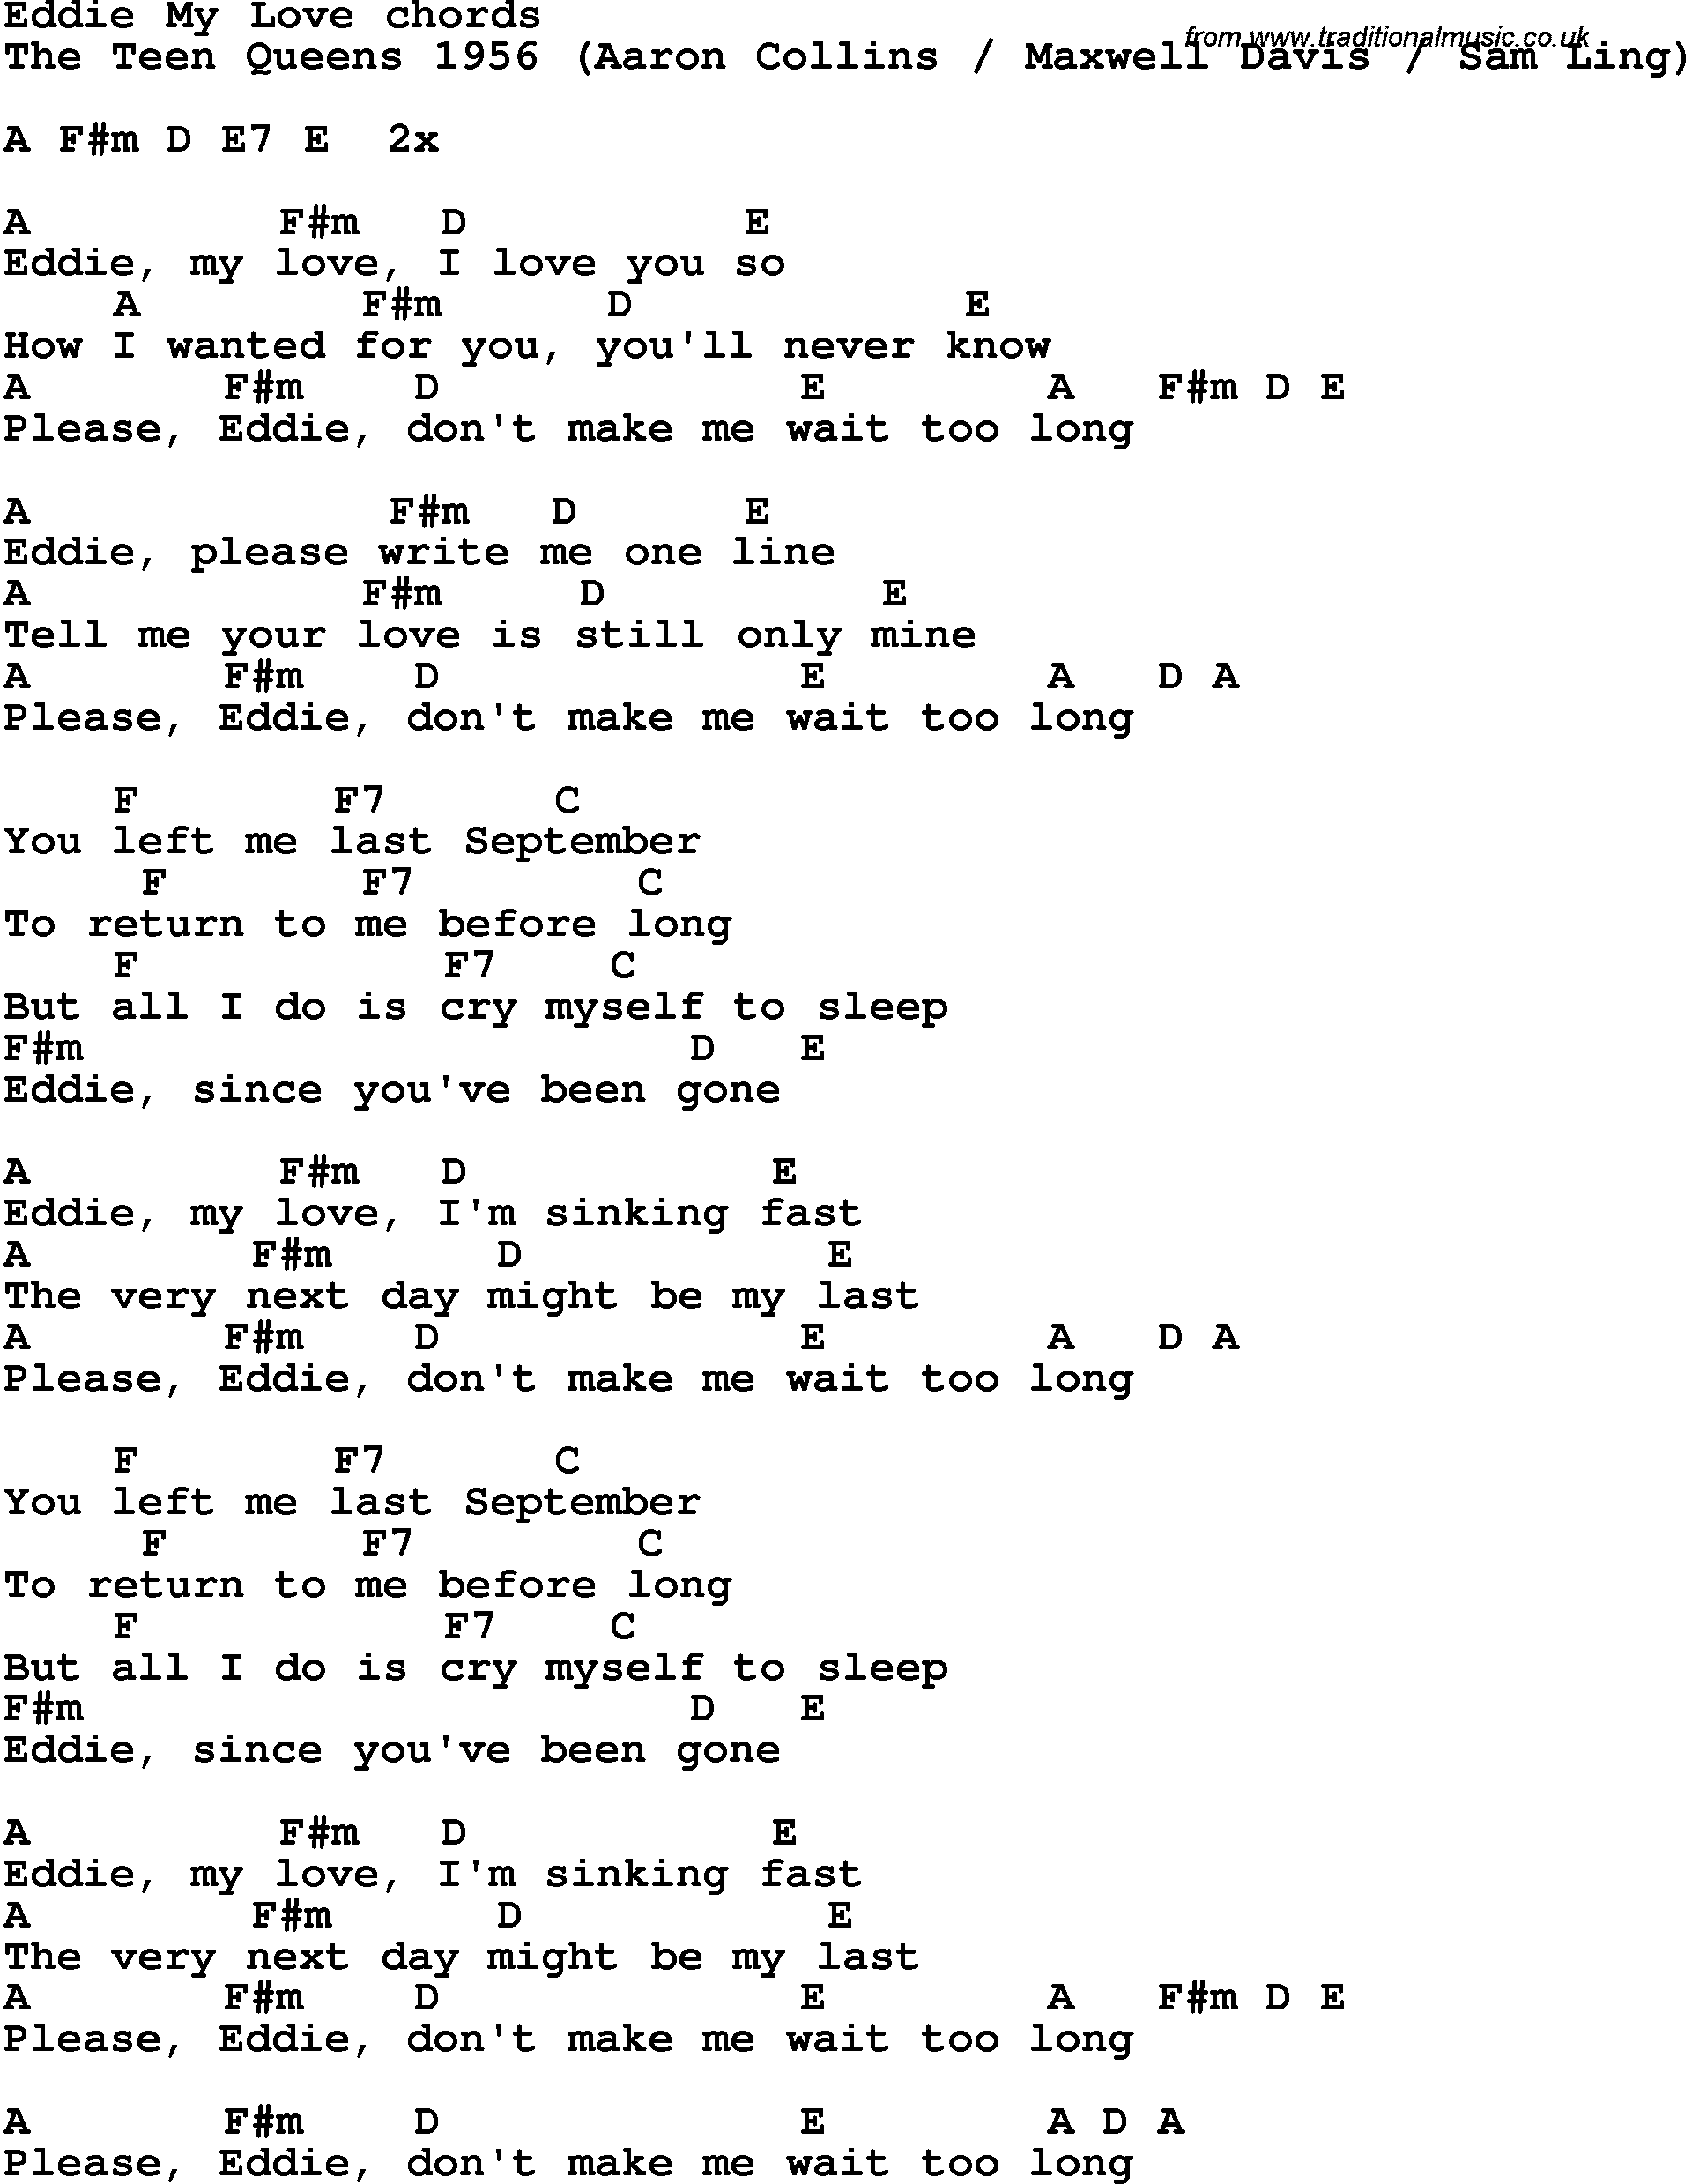 Song Lyrics with guitar chords for Eddie My Love